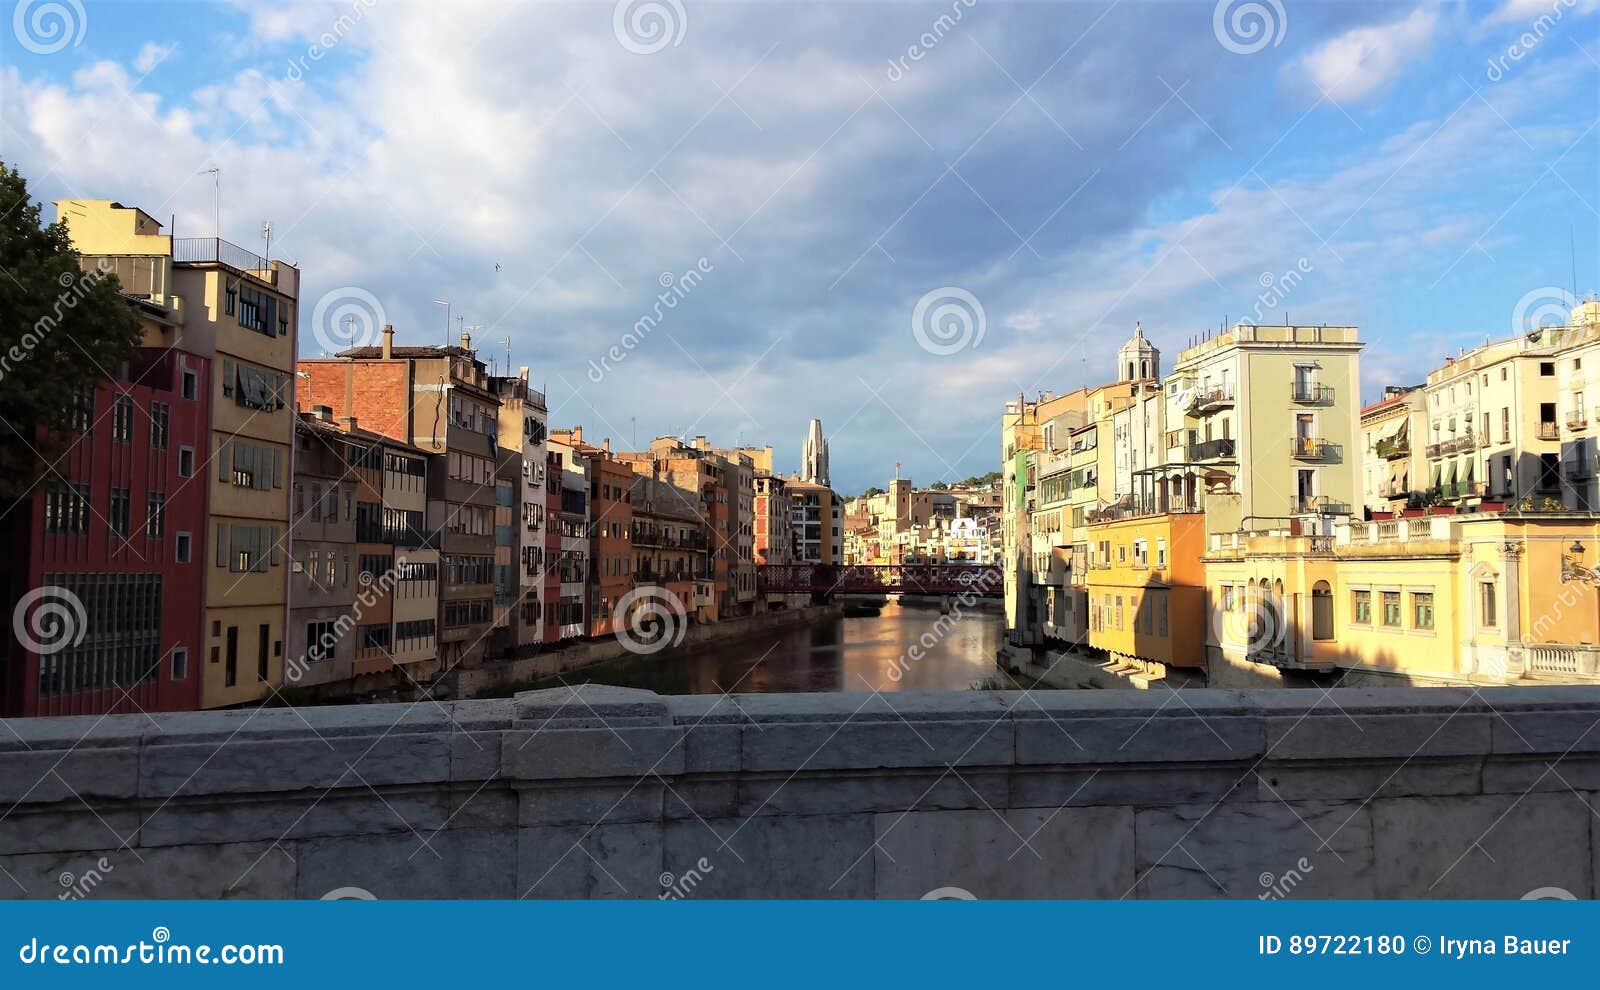 girona is beautiful old city on the river.